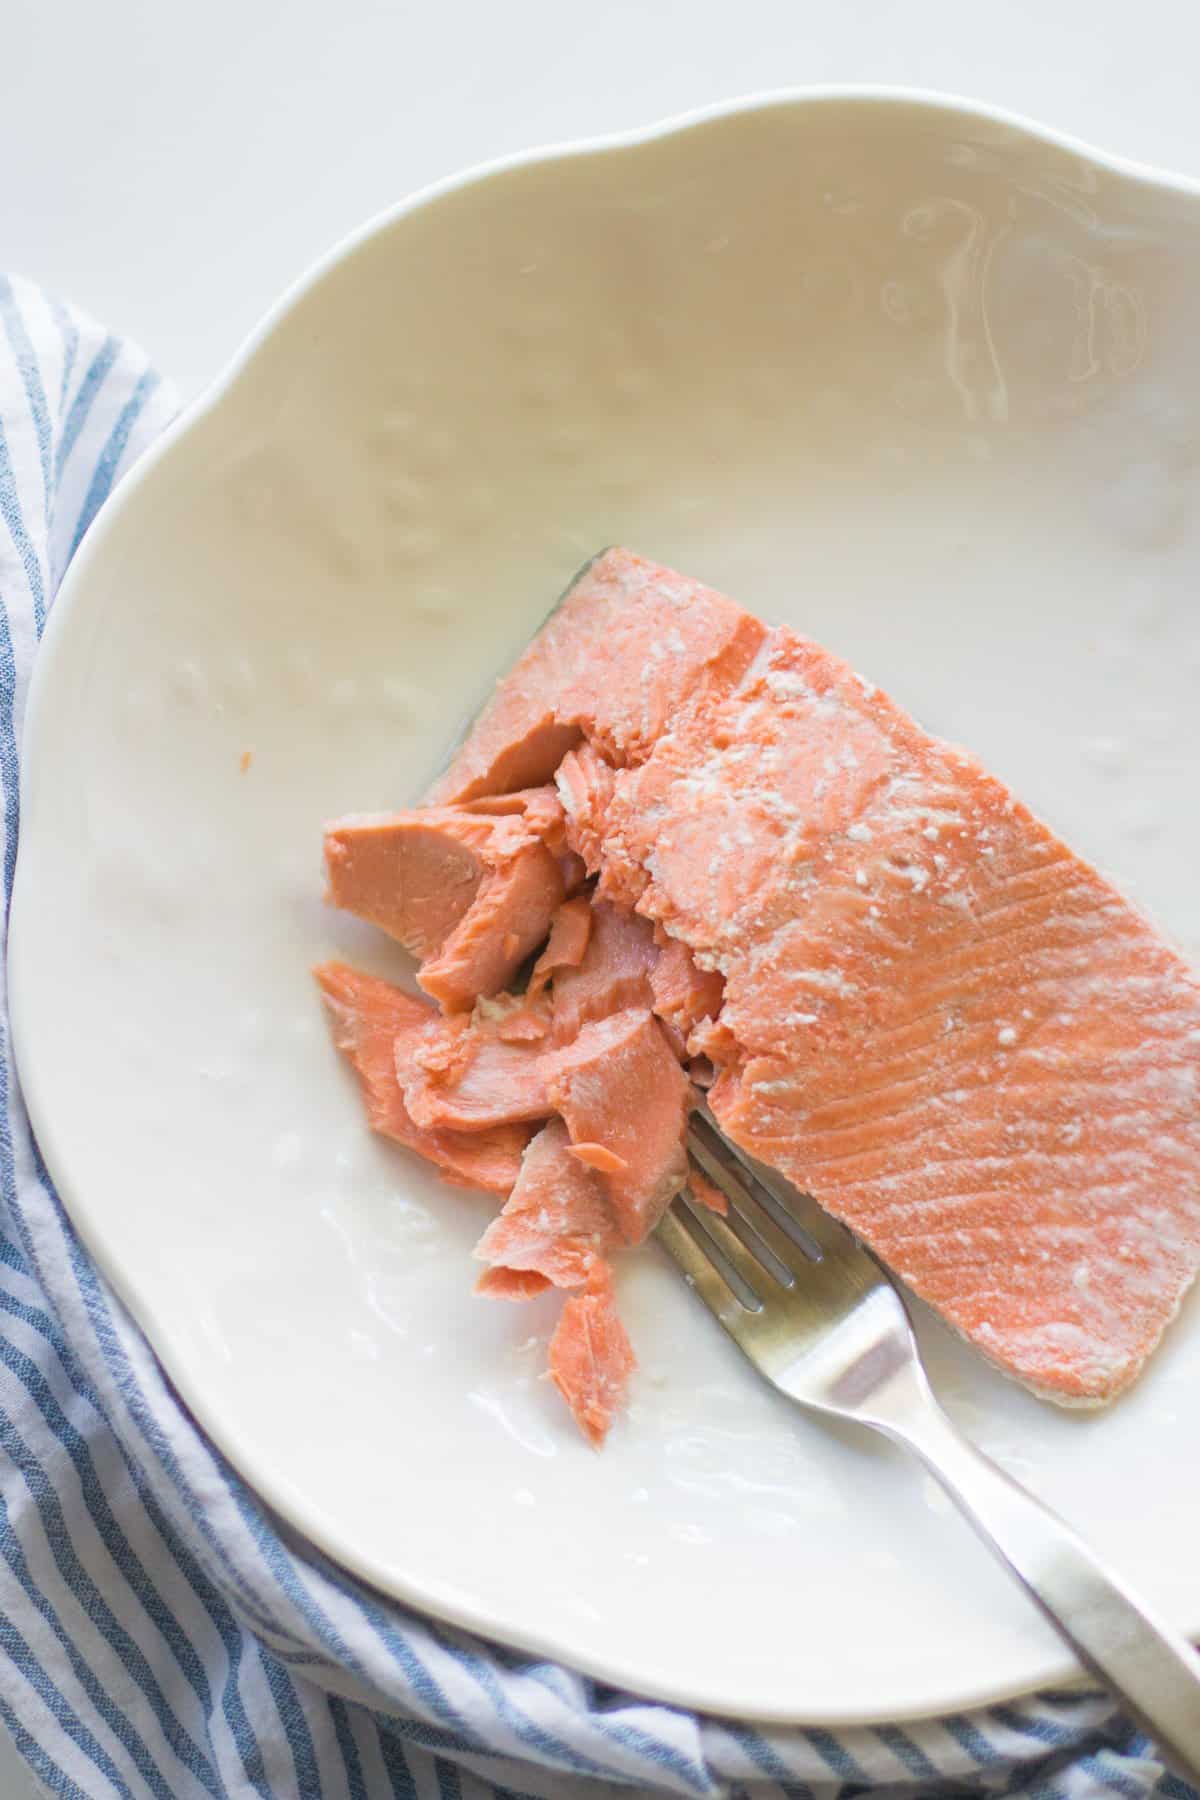 Poached salmon flaked with a fork.